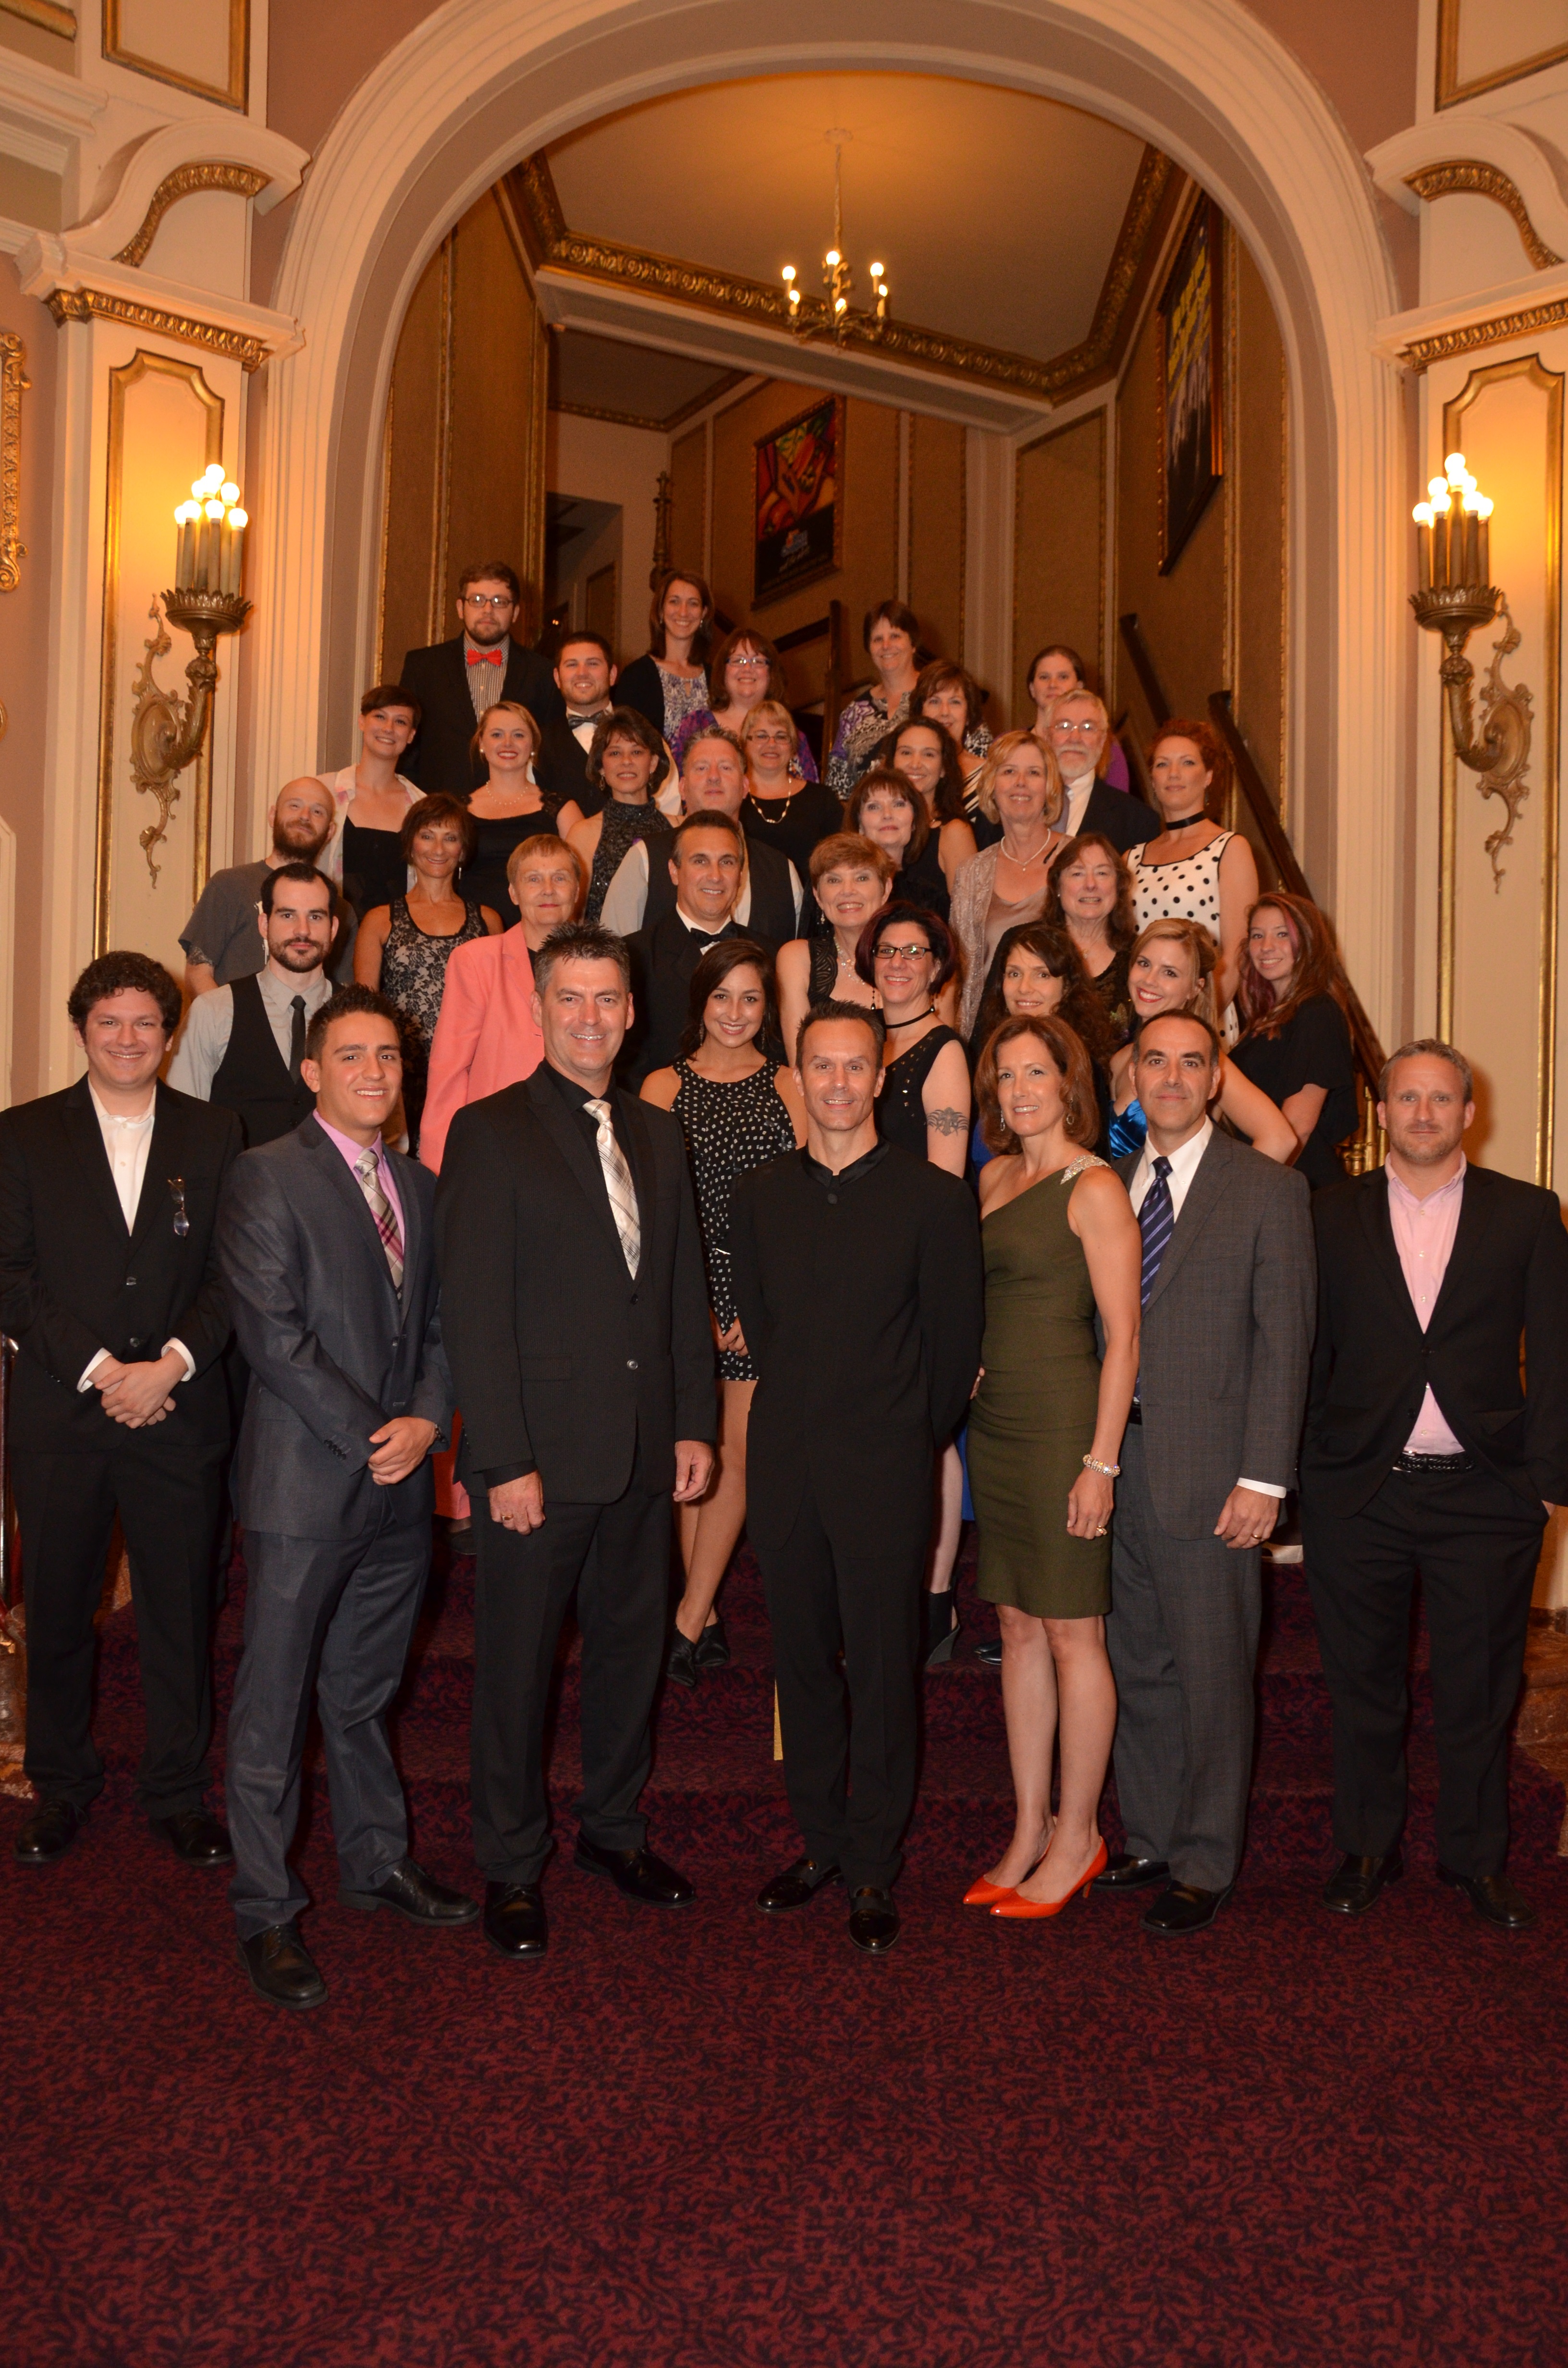 Producers, cast and crew at the world premiere of Justice Is Mind on August 18, 2013 in Albany, NY at The Palace Theatre.